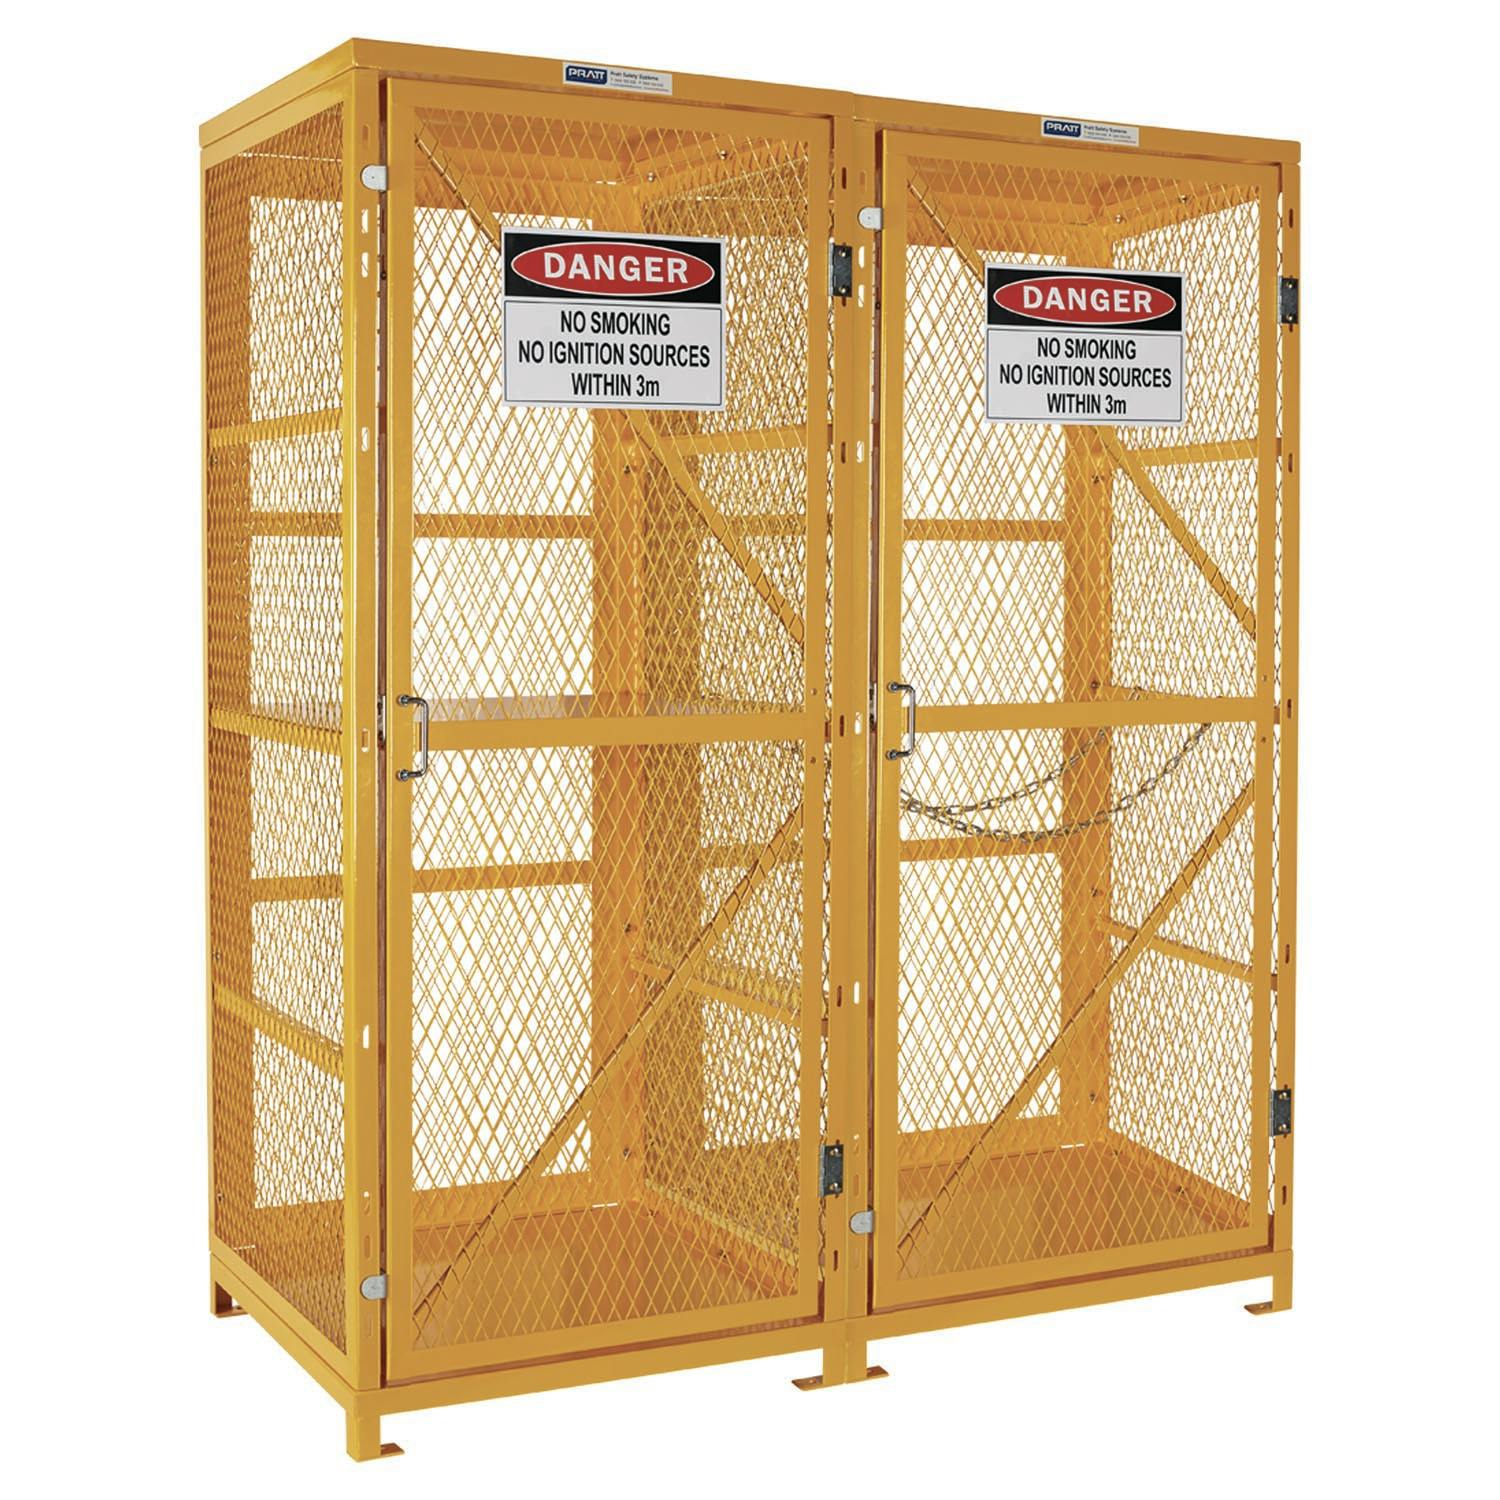 Pratt Forklift & Gas Cylinder Storage Cage. 3 Storage Levels. (Comes Flat Packed - Assembly Required)